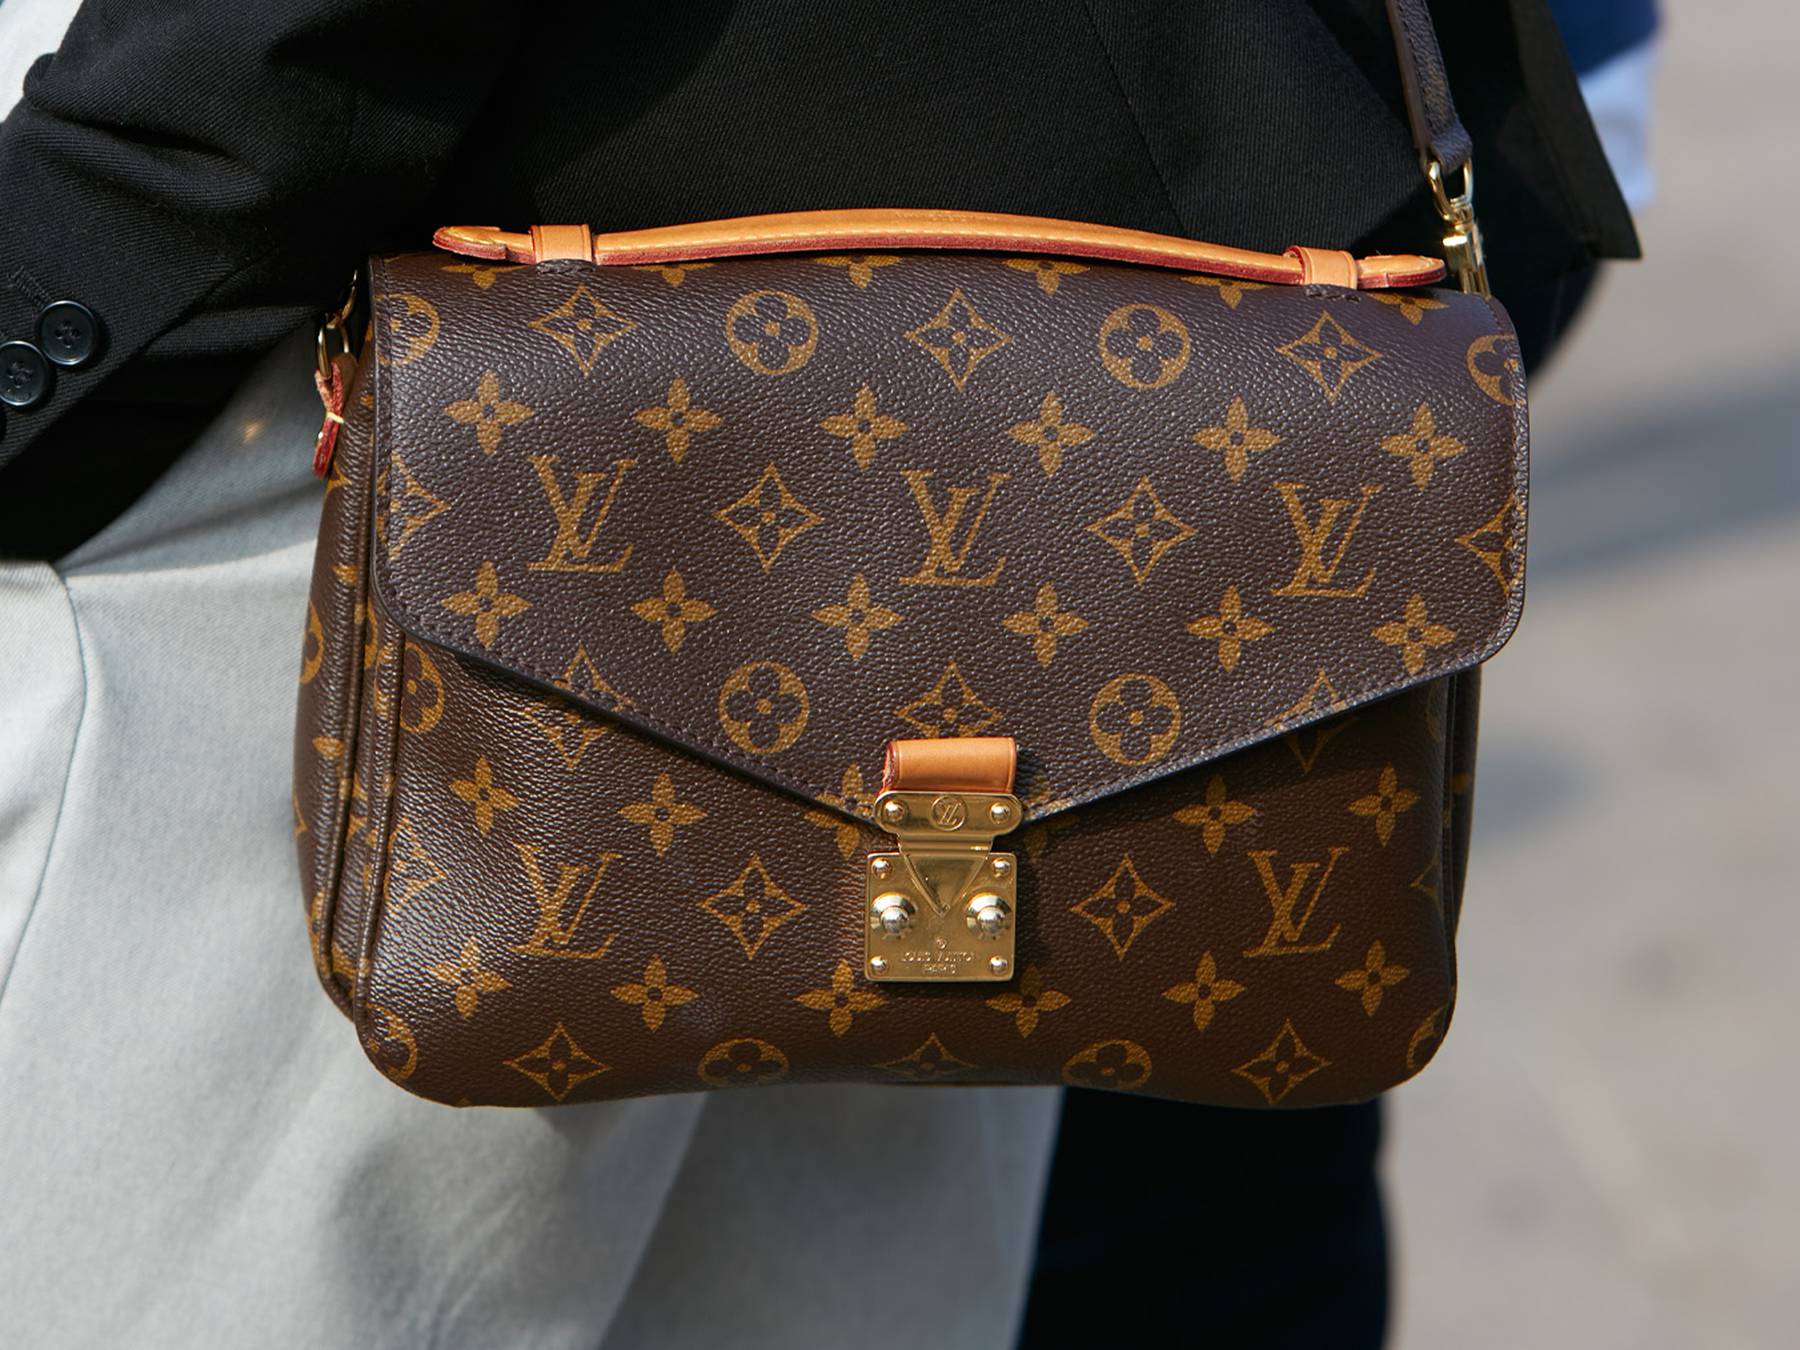 LVMH's market value exceeds $500 billion, a first in Europe